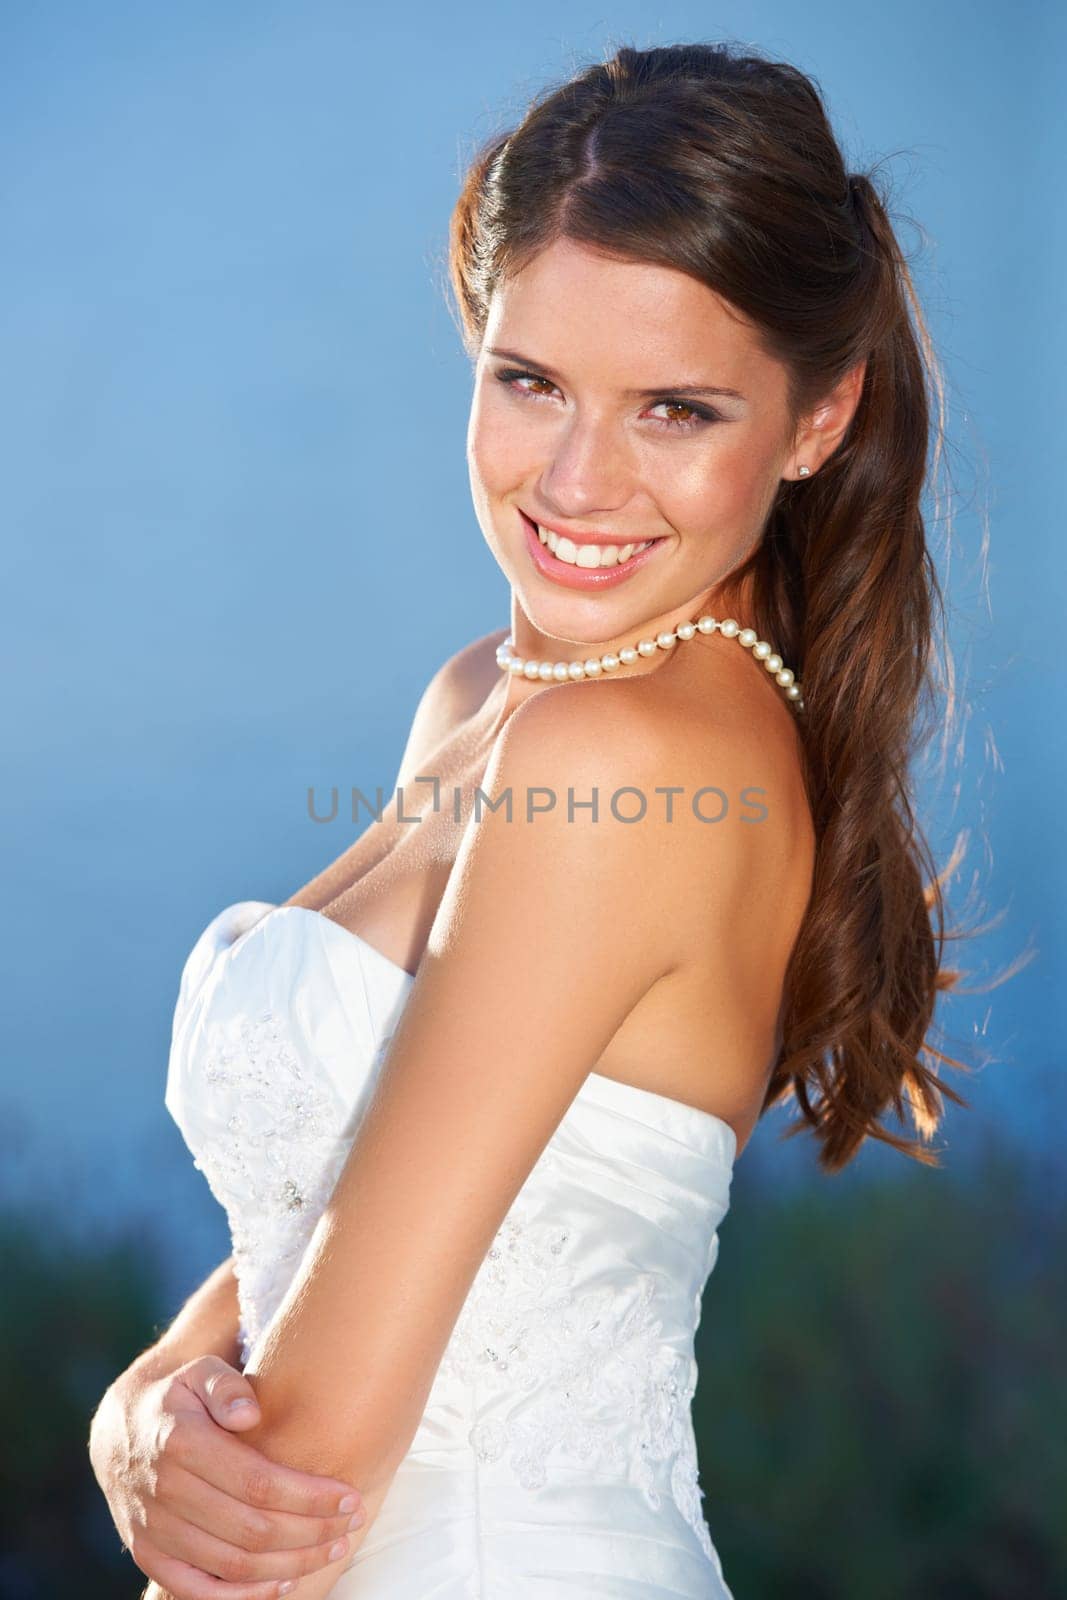 Bride, portrait and smile outdoor for love, commitment and celebration ceremony with confidence. Jewelry, woman and happy from future marriage, romance and formal event in a garden with a dress.